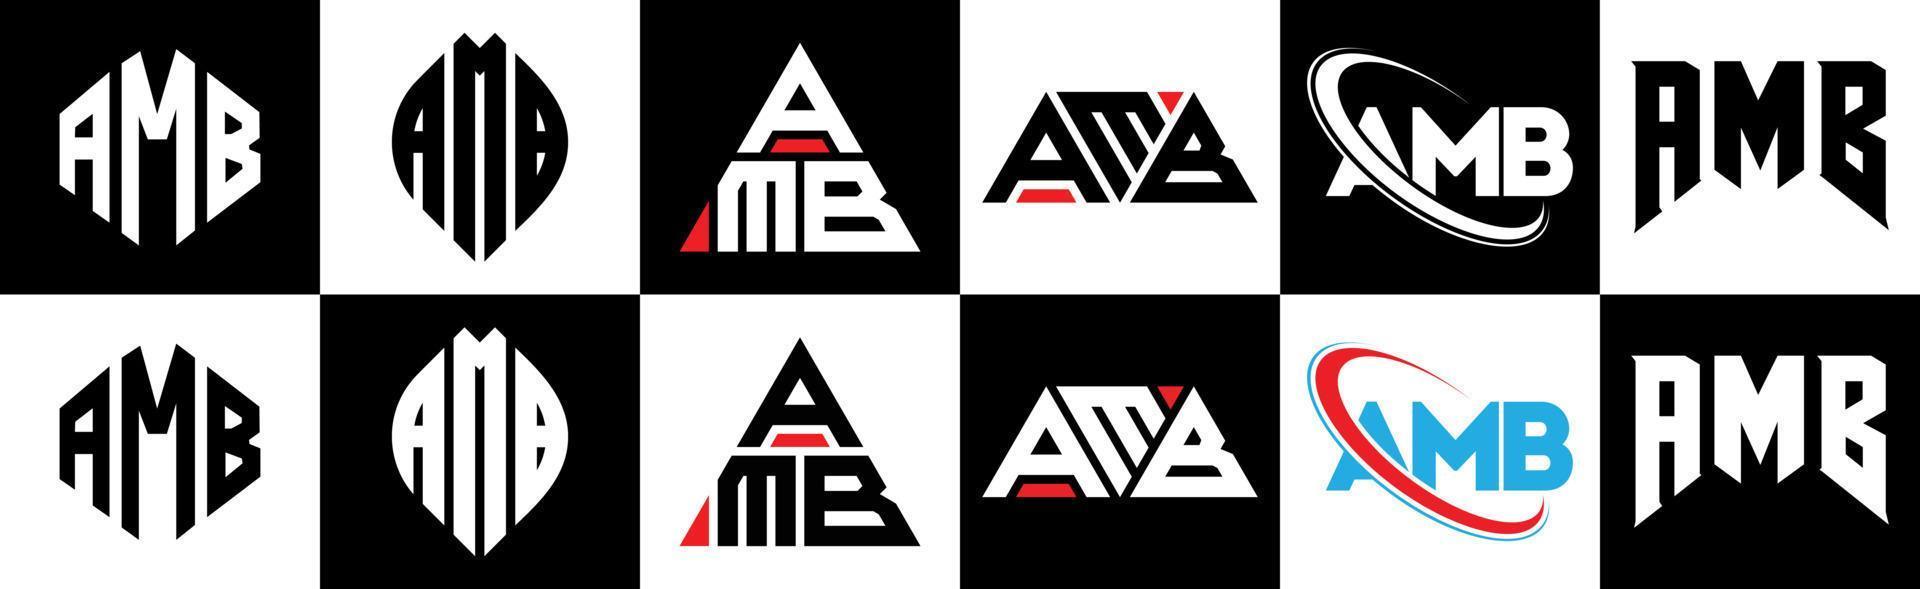 AMB letter logo design in six style. AMB polygon, circle, triangle, hexagon, flat and simple style with black and white color variation letter logo set in one artboard. AMB minimalist and classic logo vector